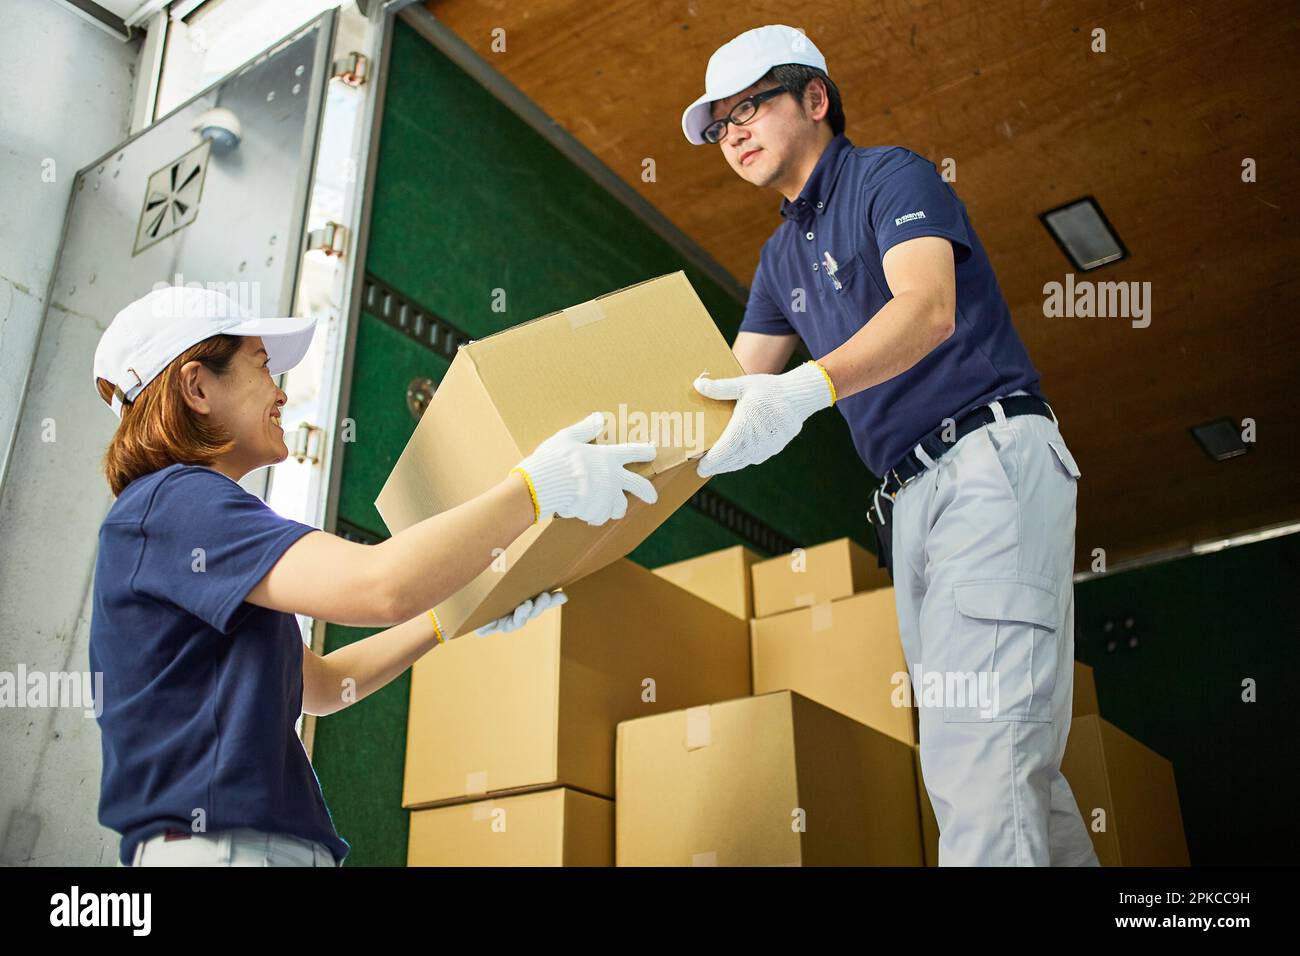 Man and woman in work clothes unloading cardboard boxes from a truck Stock Photo